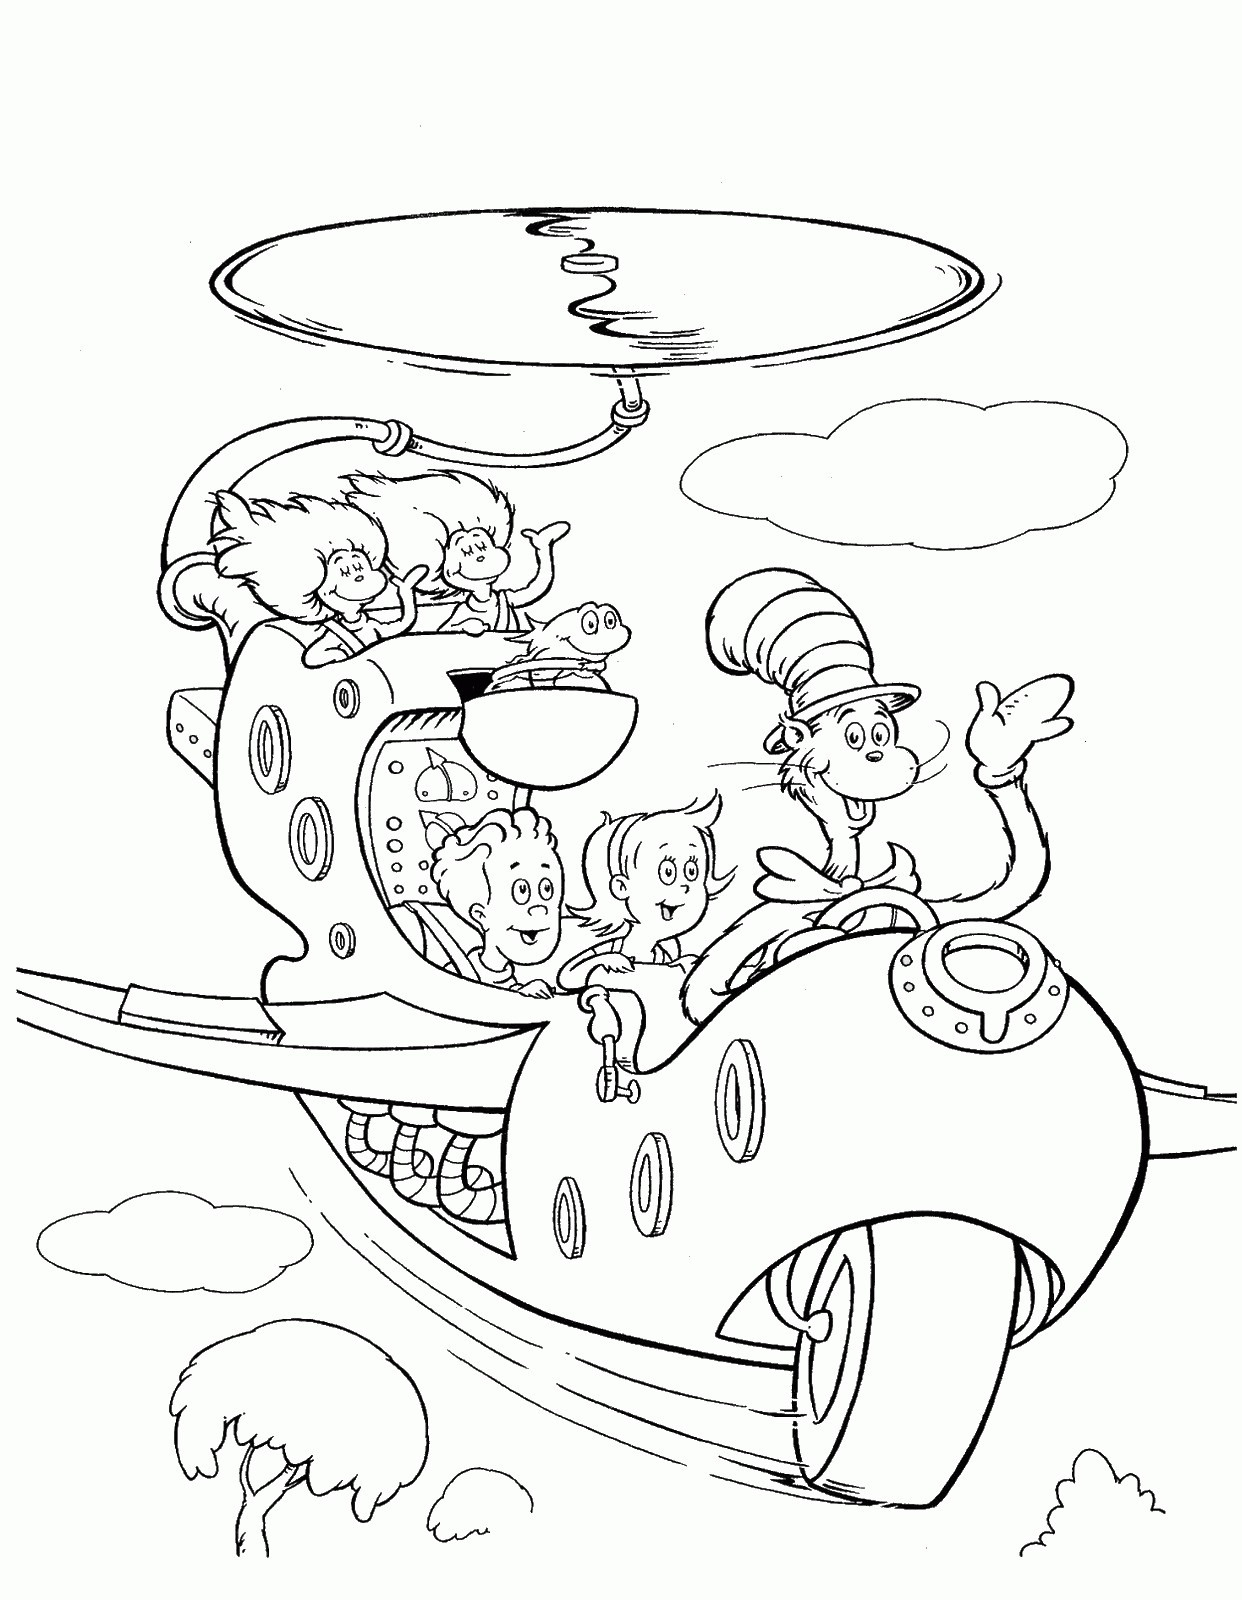 Coloring Pages Cat In the Hat Wallpaper